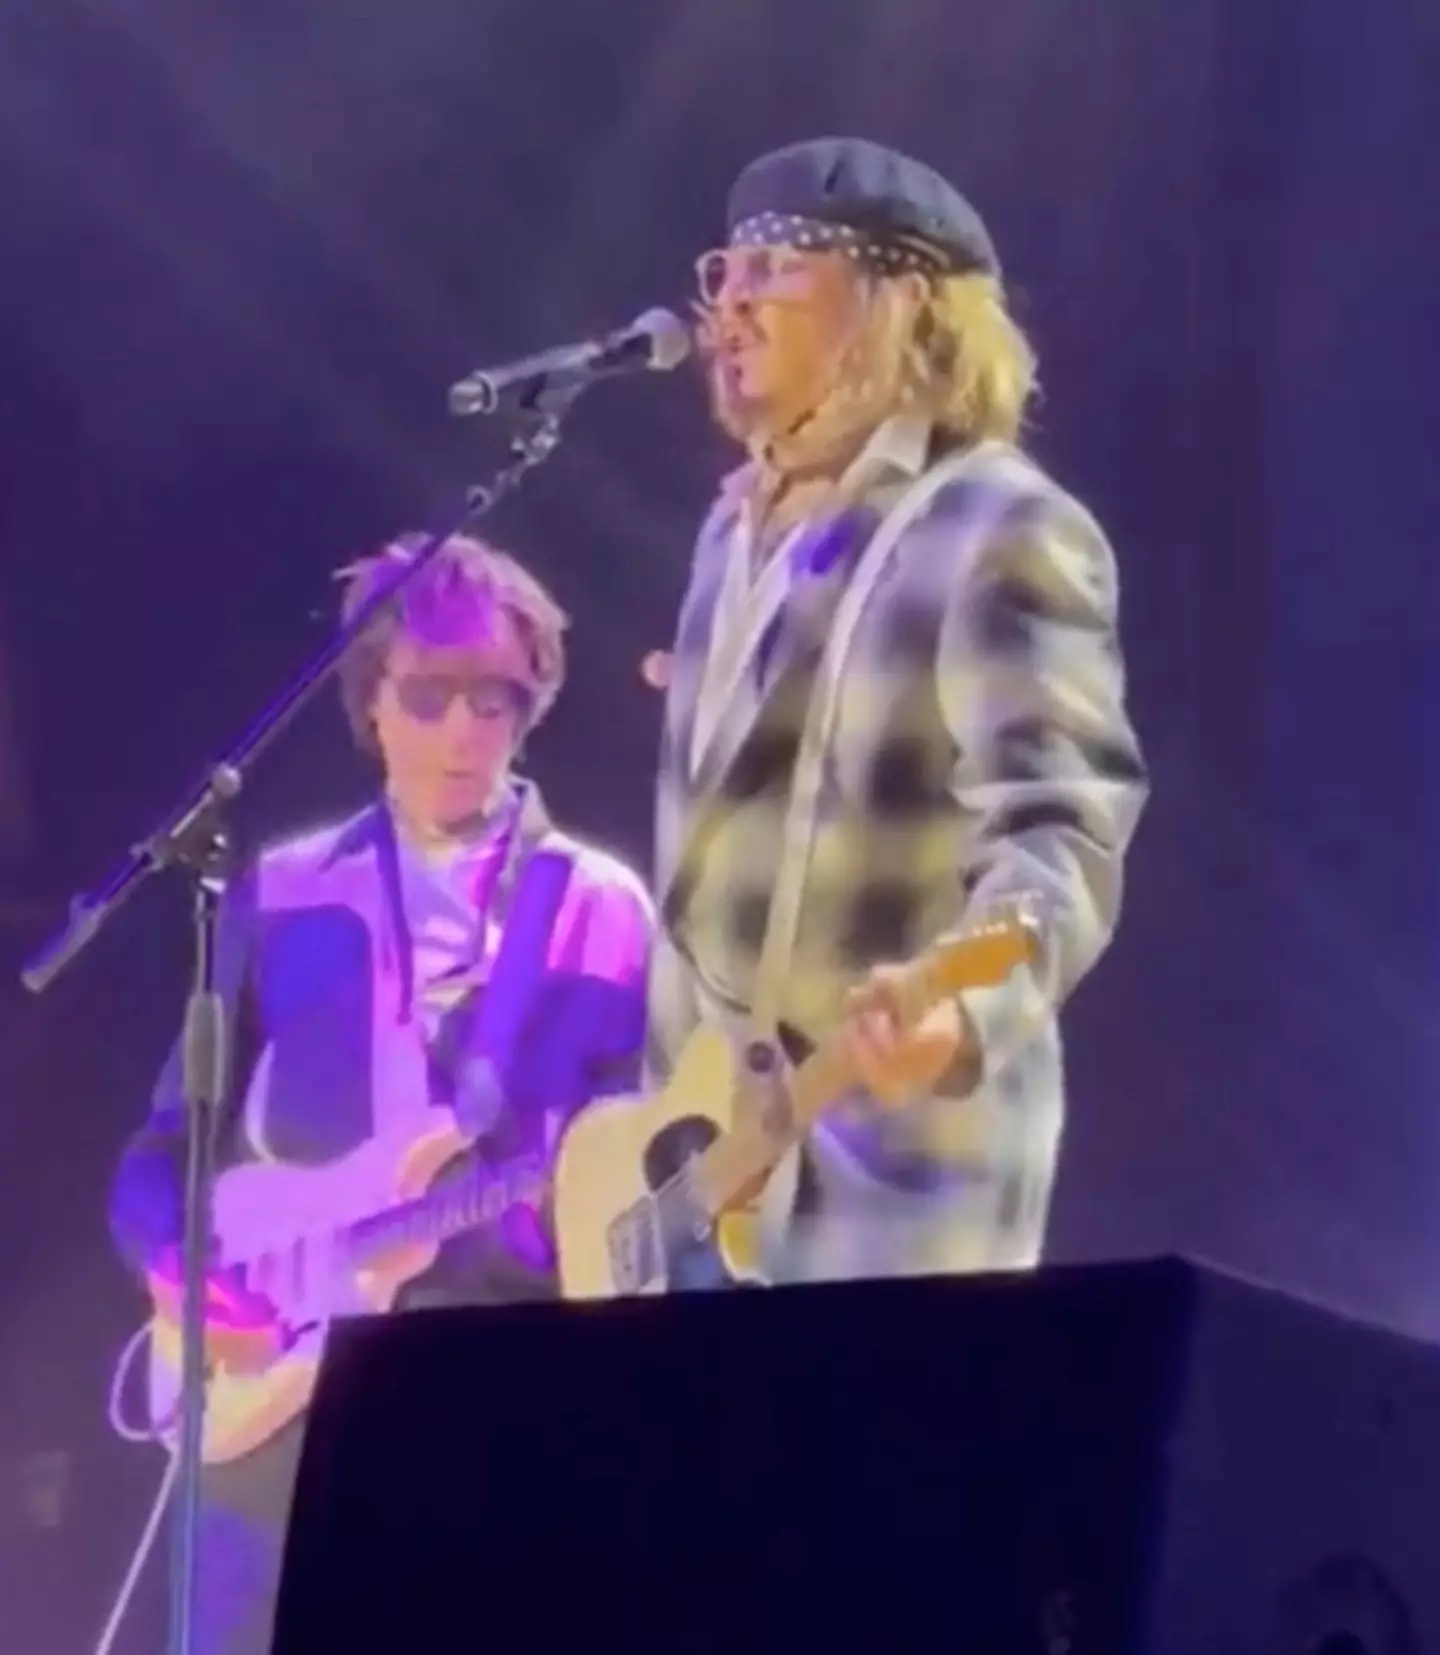 Depp surprised fans by joining Jeff Beck on stage.